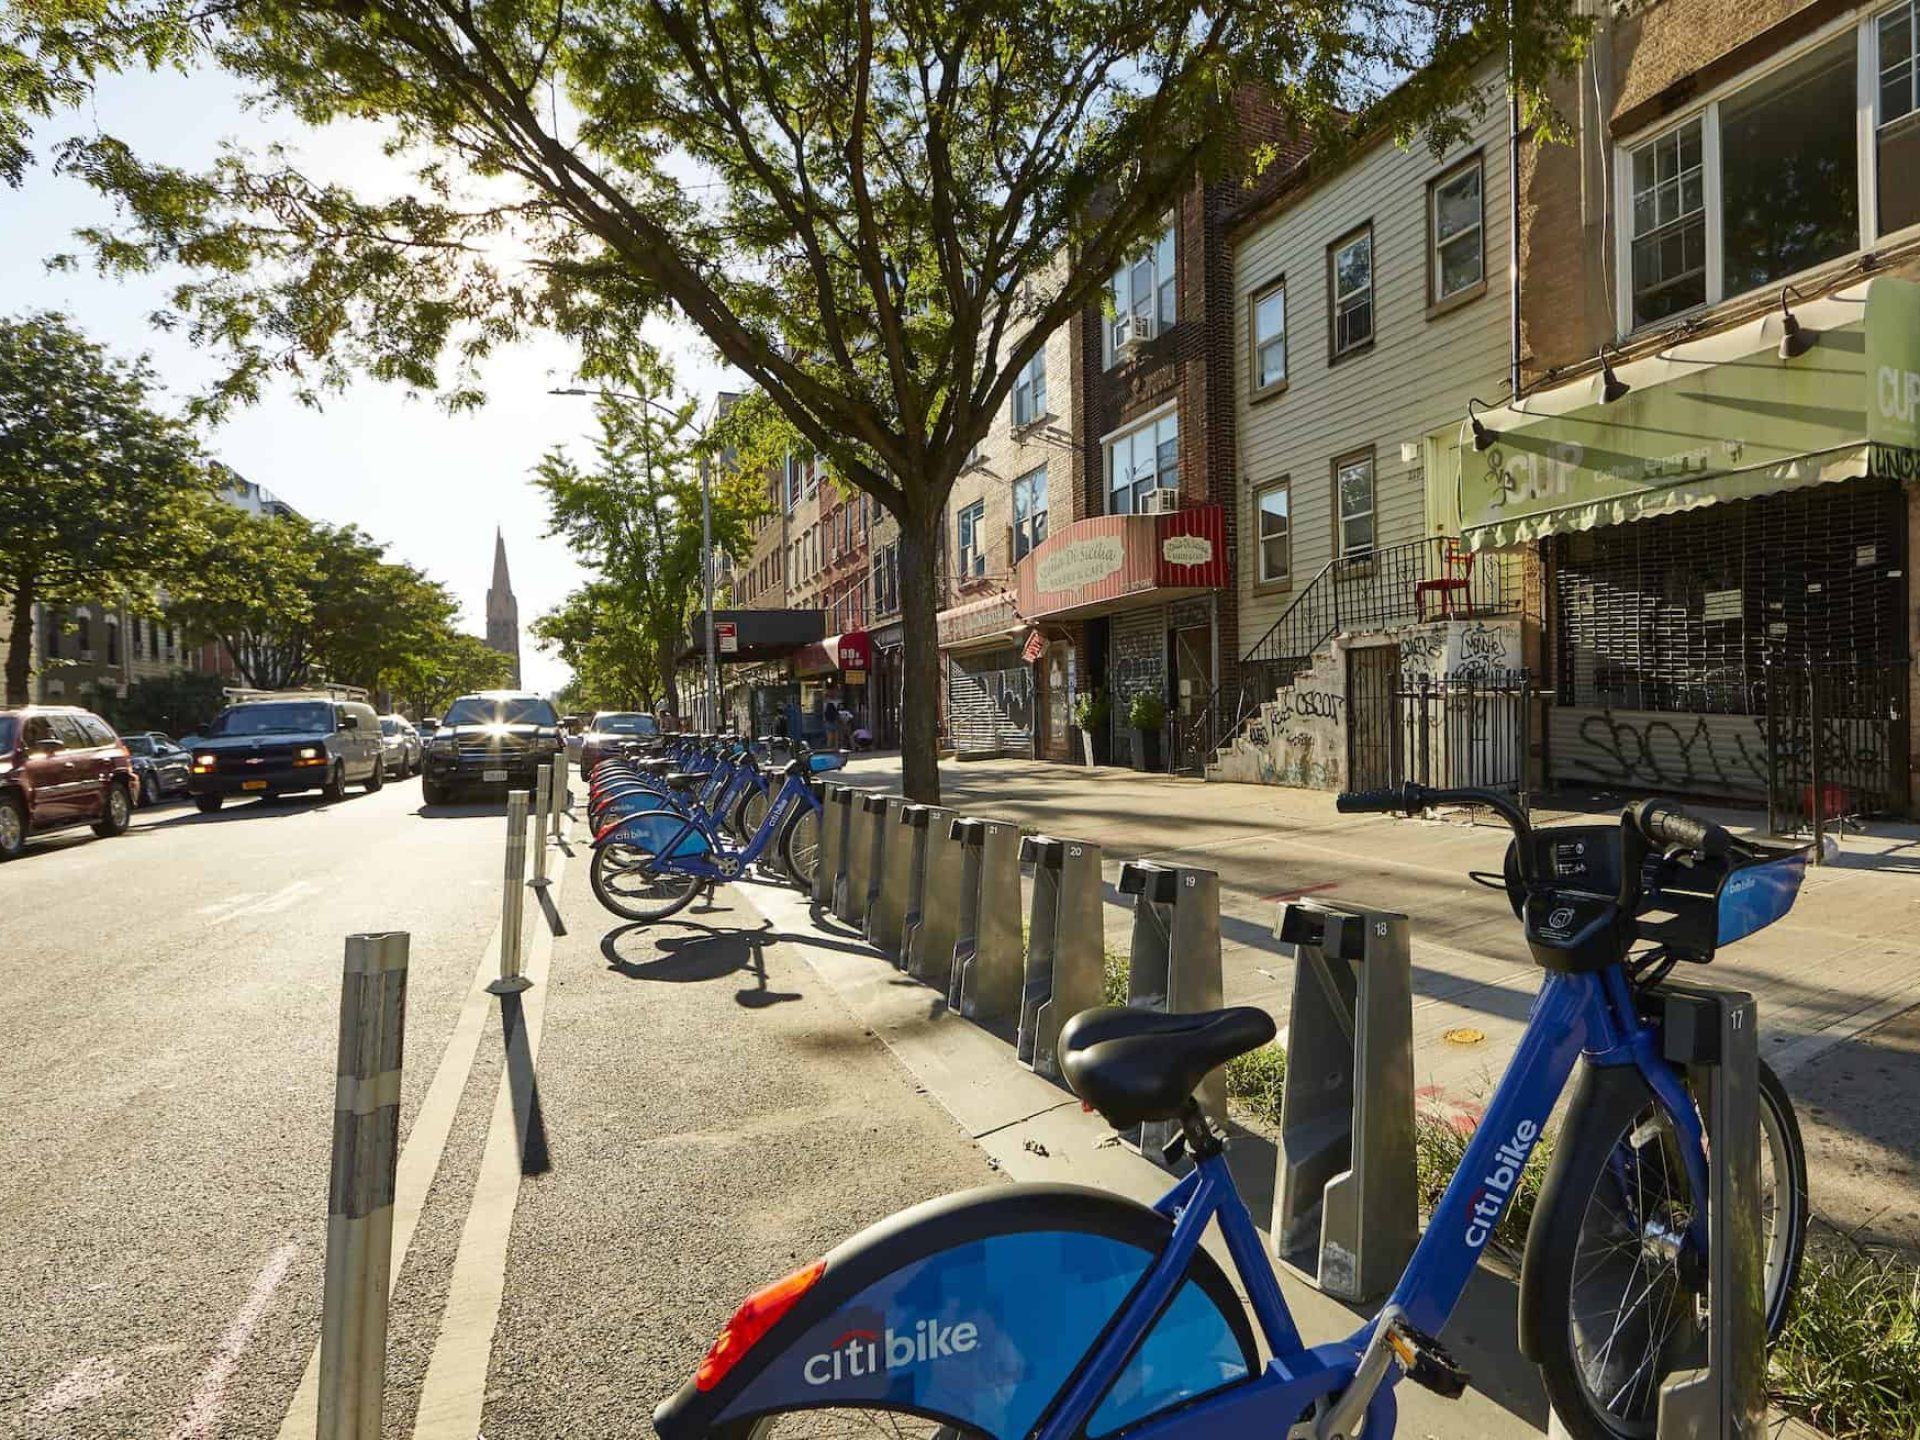 Blue Citi bikes lined up in bike racks along a street in the East Williamsburg neighborhood with cars in the background.